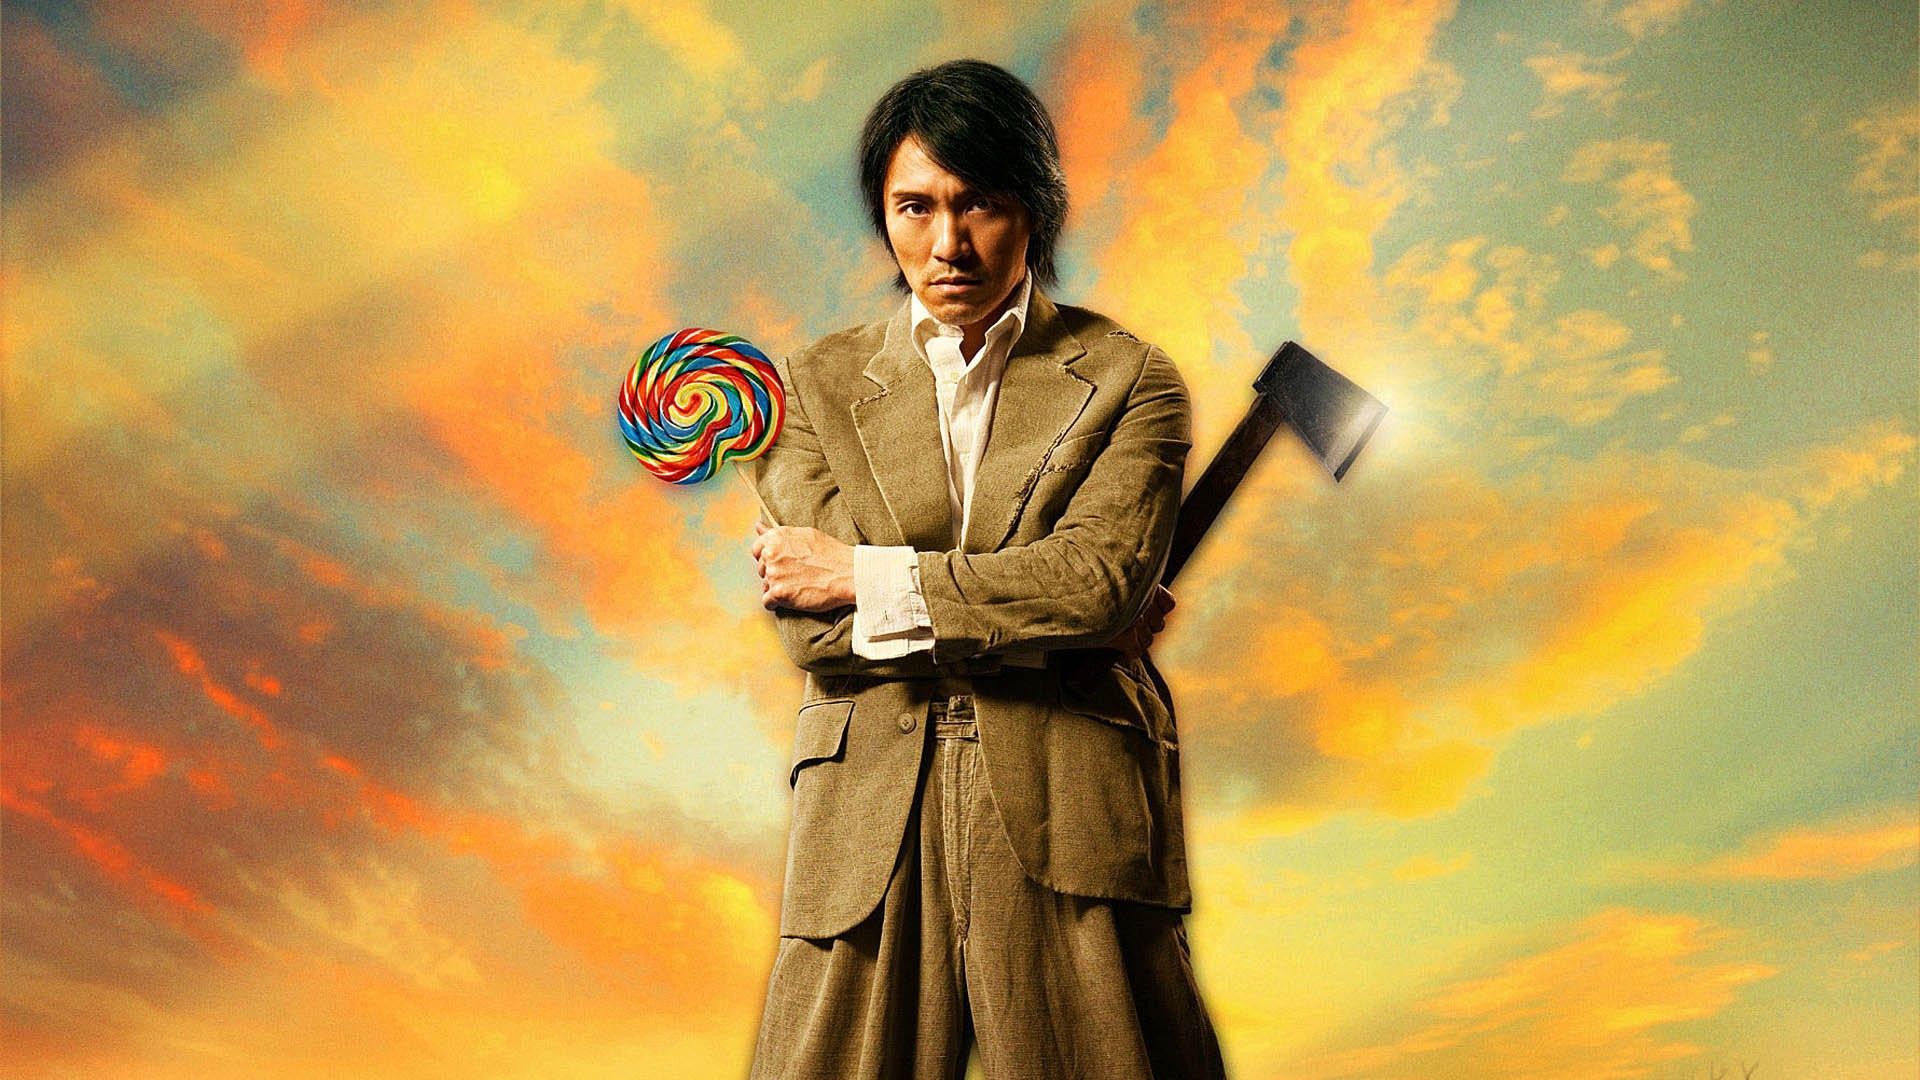 Stephen Chow's classic Kung Fu Hustle gets new life in 3D. South China Morning Post